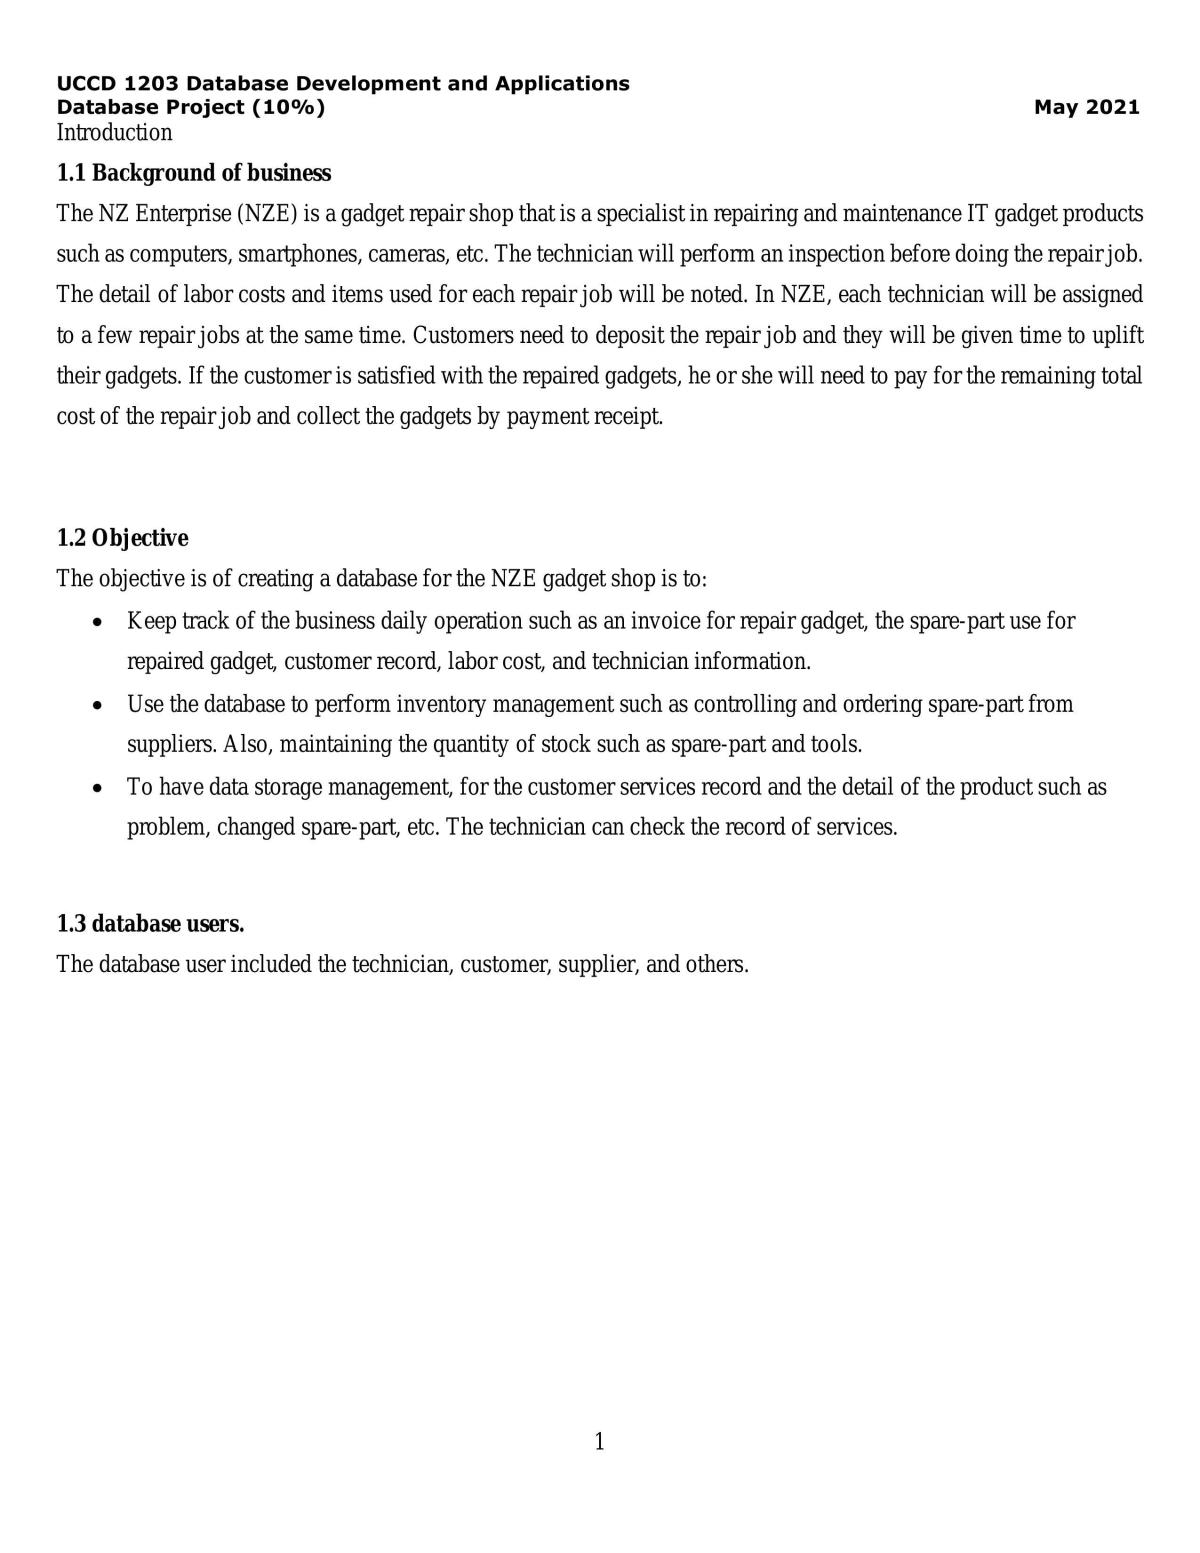 UCCD1203: Database Development and Applications Assignment - Page 2